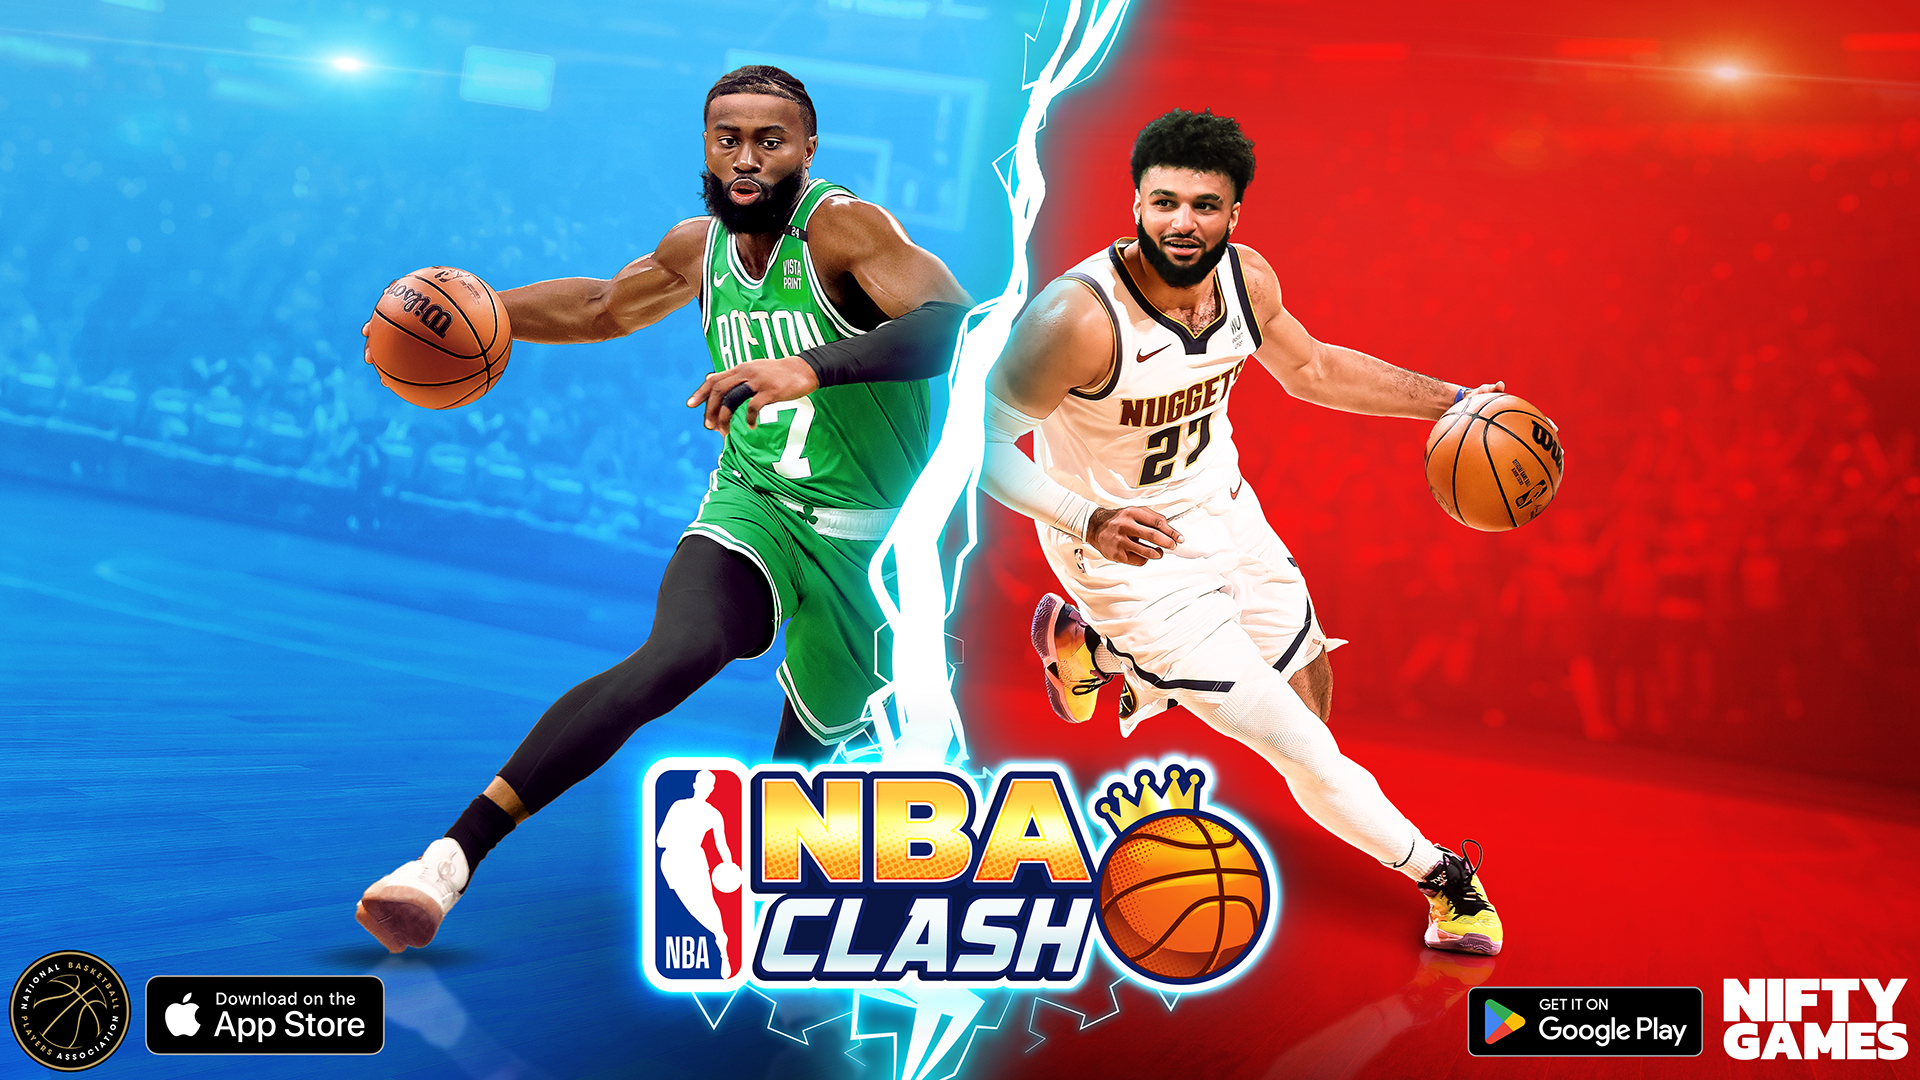 NIFTY GAMES® LAUNCHES NBA® CLASH™ FOR MOBILE; NBA® STARS JAYLEN BROWN & JAMAL MURRAY NAMED AS HIGHLIGHT ATHLETES